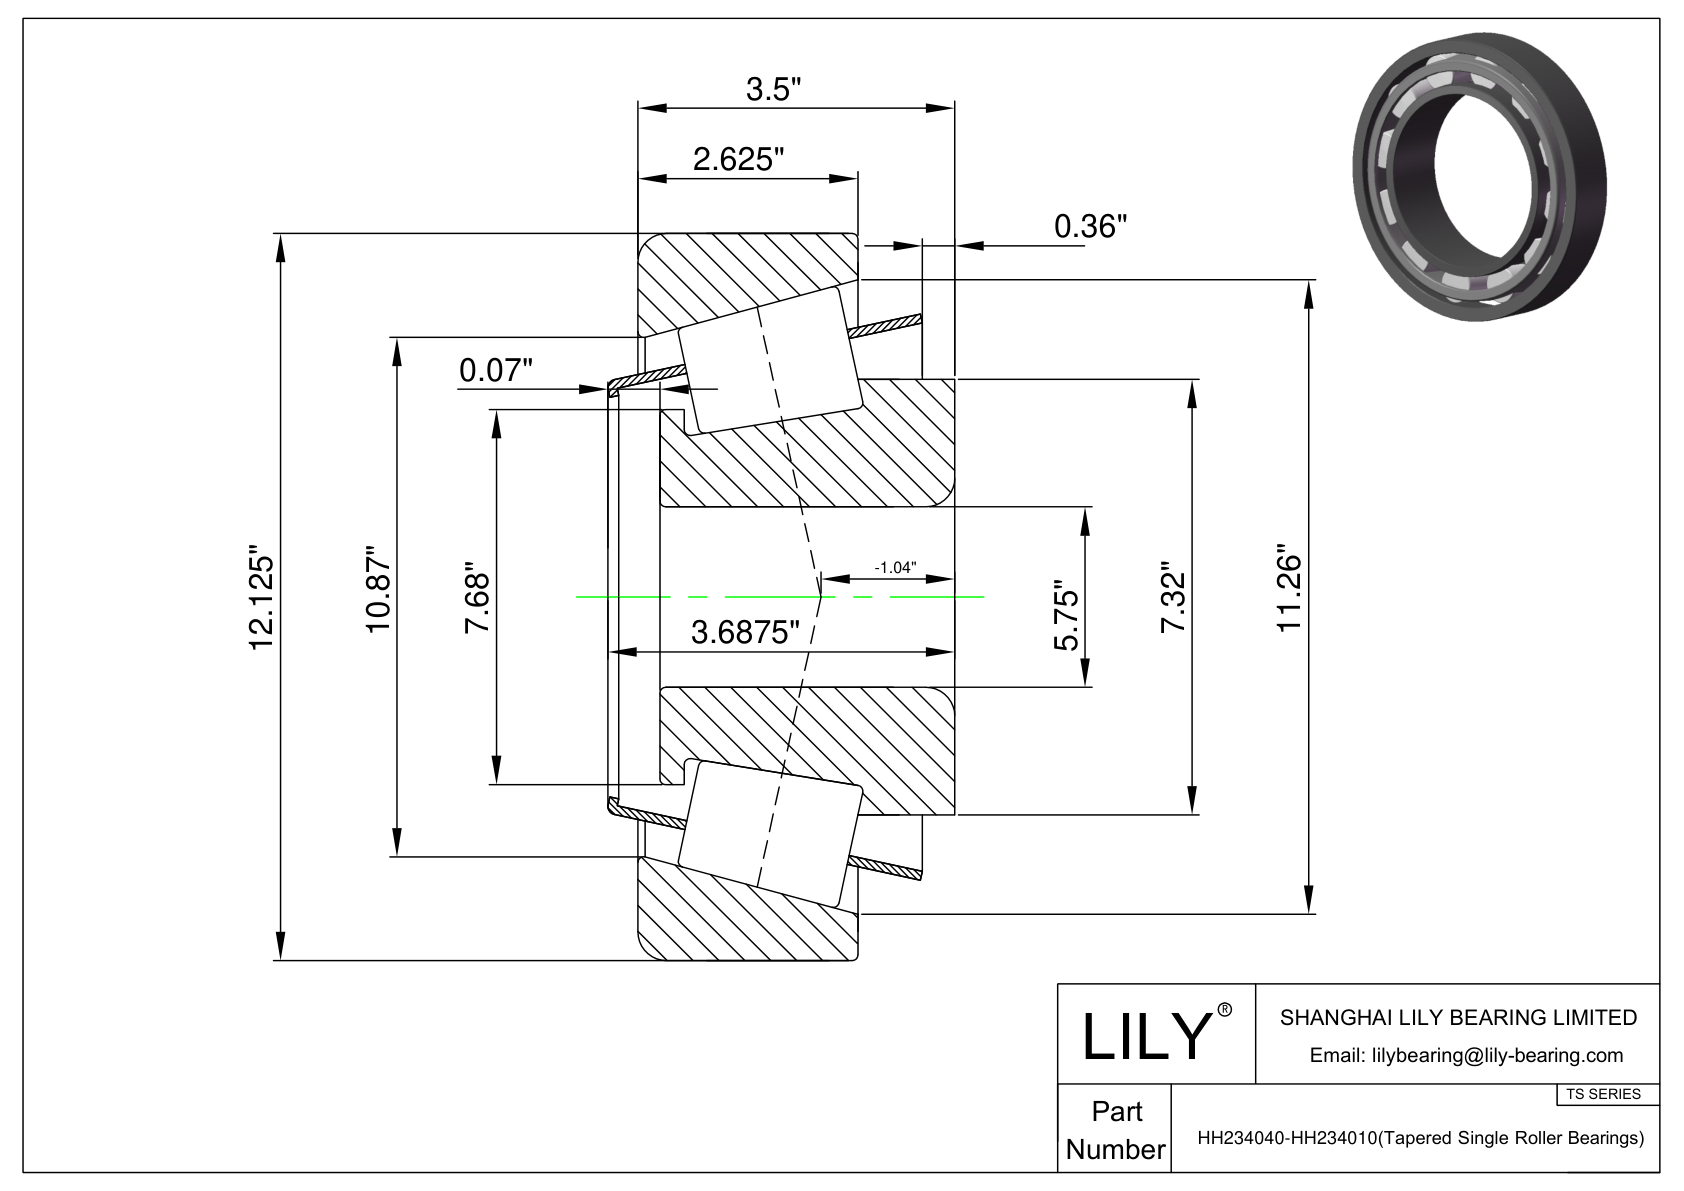 HH234040-HH234010 TS (Tapered Single Roller Bearings) (Imperial) cad drawing